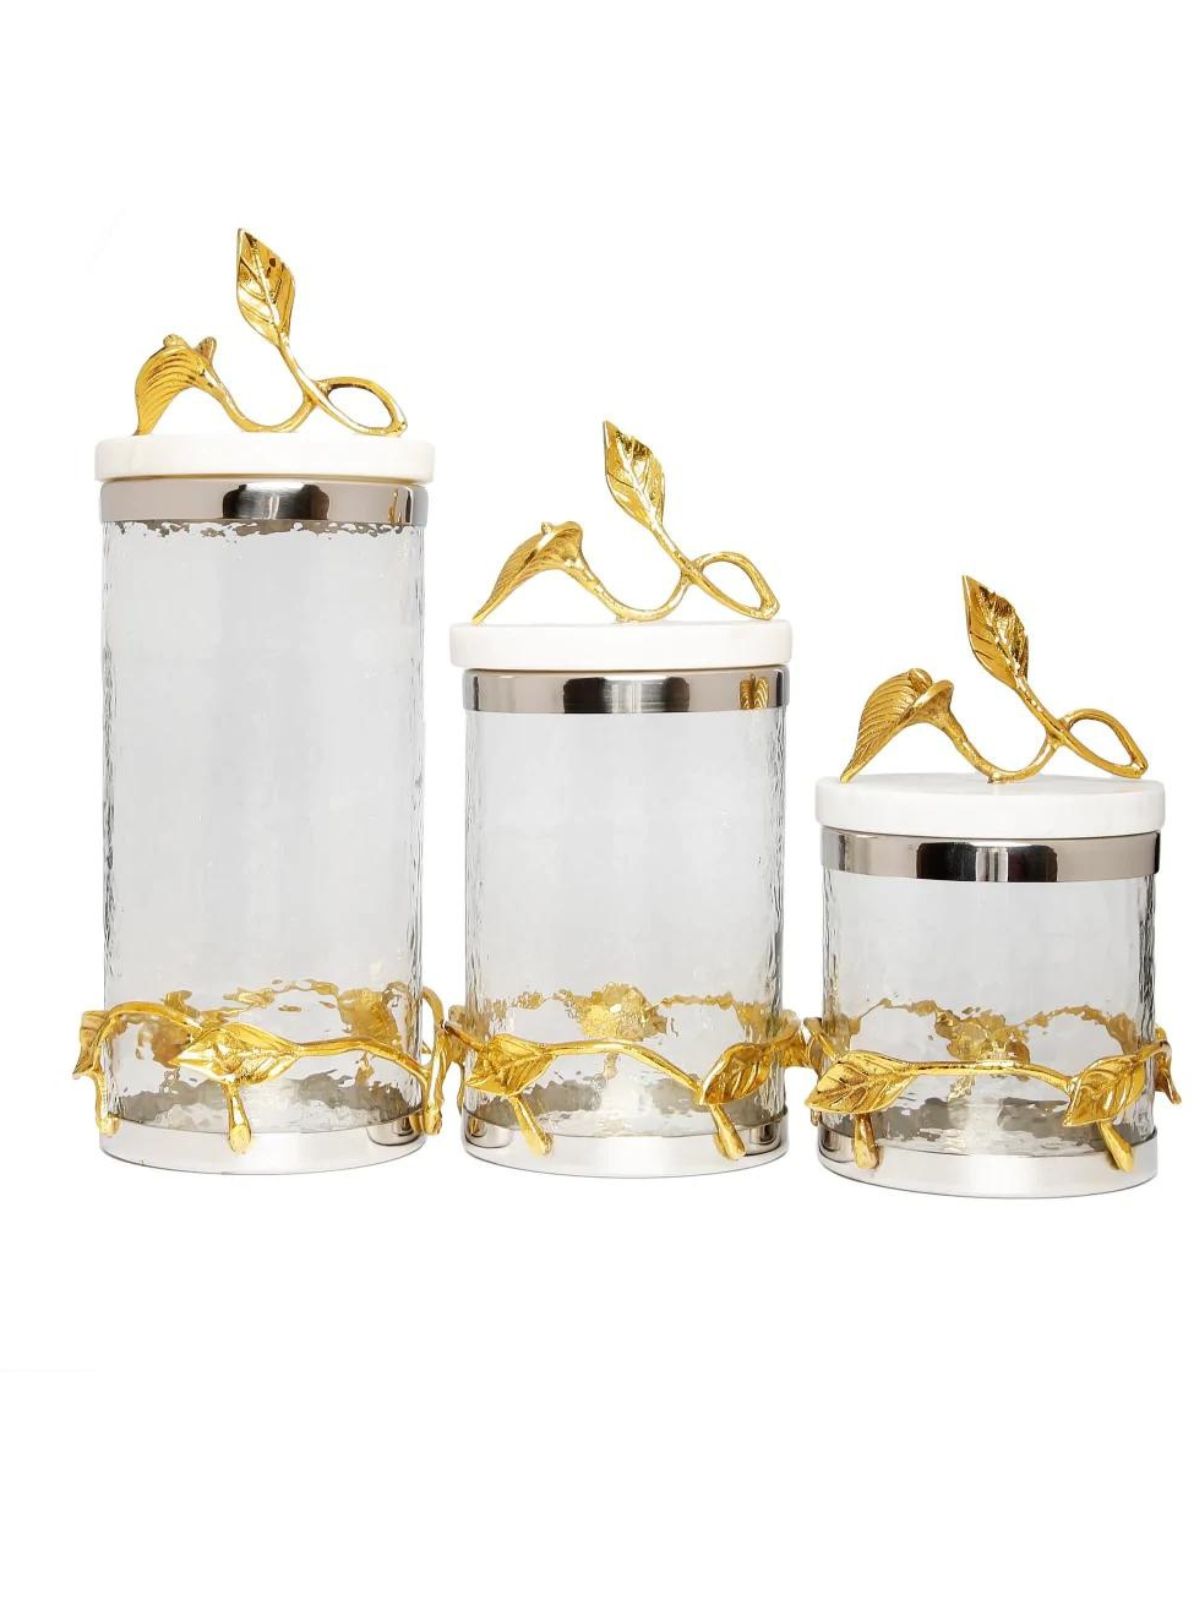 Luxury Glass Kitchen Canister With Gold Leaf Design and Marble Lid, 3 sizes - KYA Home Decor.